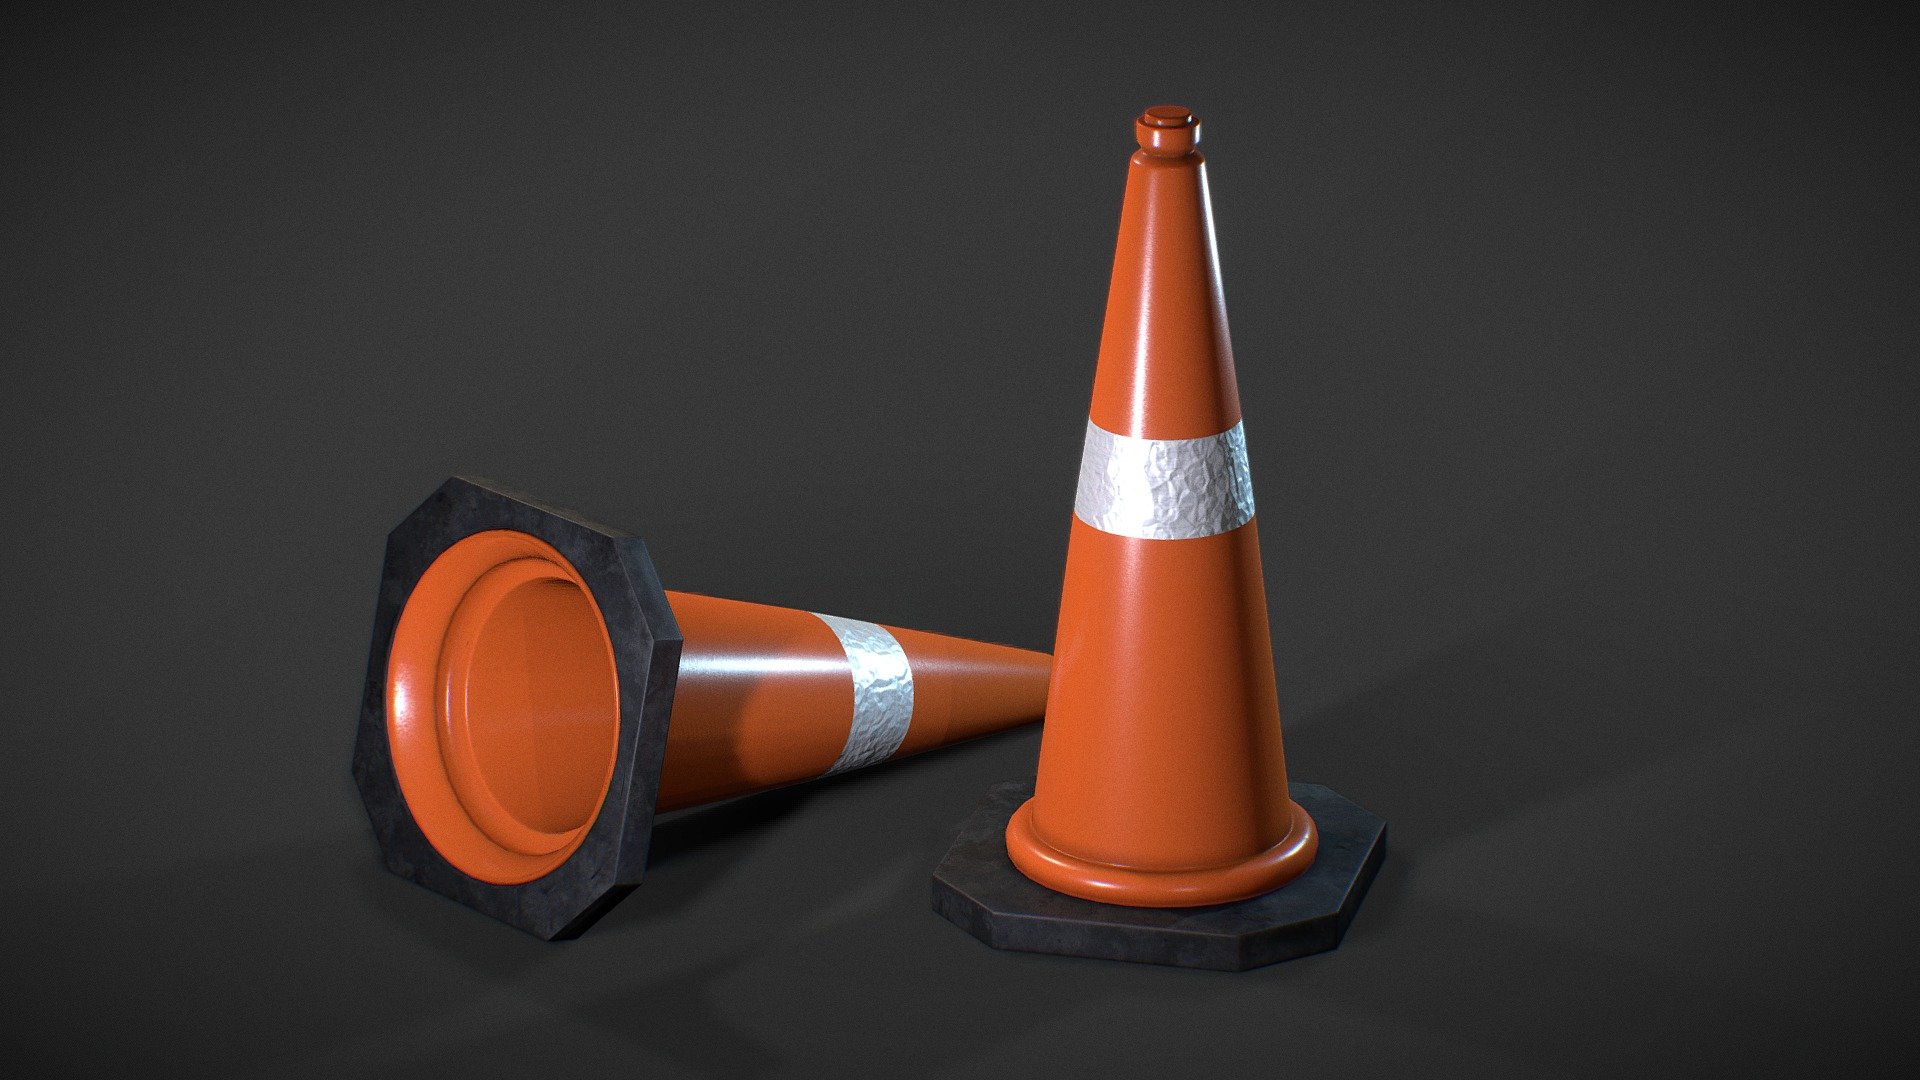 3d model of a road safety cone for using in exterior scenes. It can be used as a traffic road-side element in games or many other render scenes.

This model is created in Maya and textured in Substance 3d painter.

It is made in real-proportions.

High quality textures are available to download.

Metallic-roughness workflow which includes - Diffuse, AO, Metallic, Roughness and Normal Maps 3d model